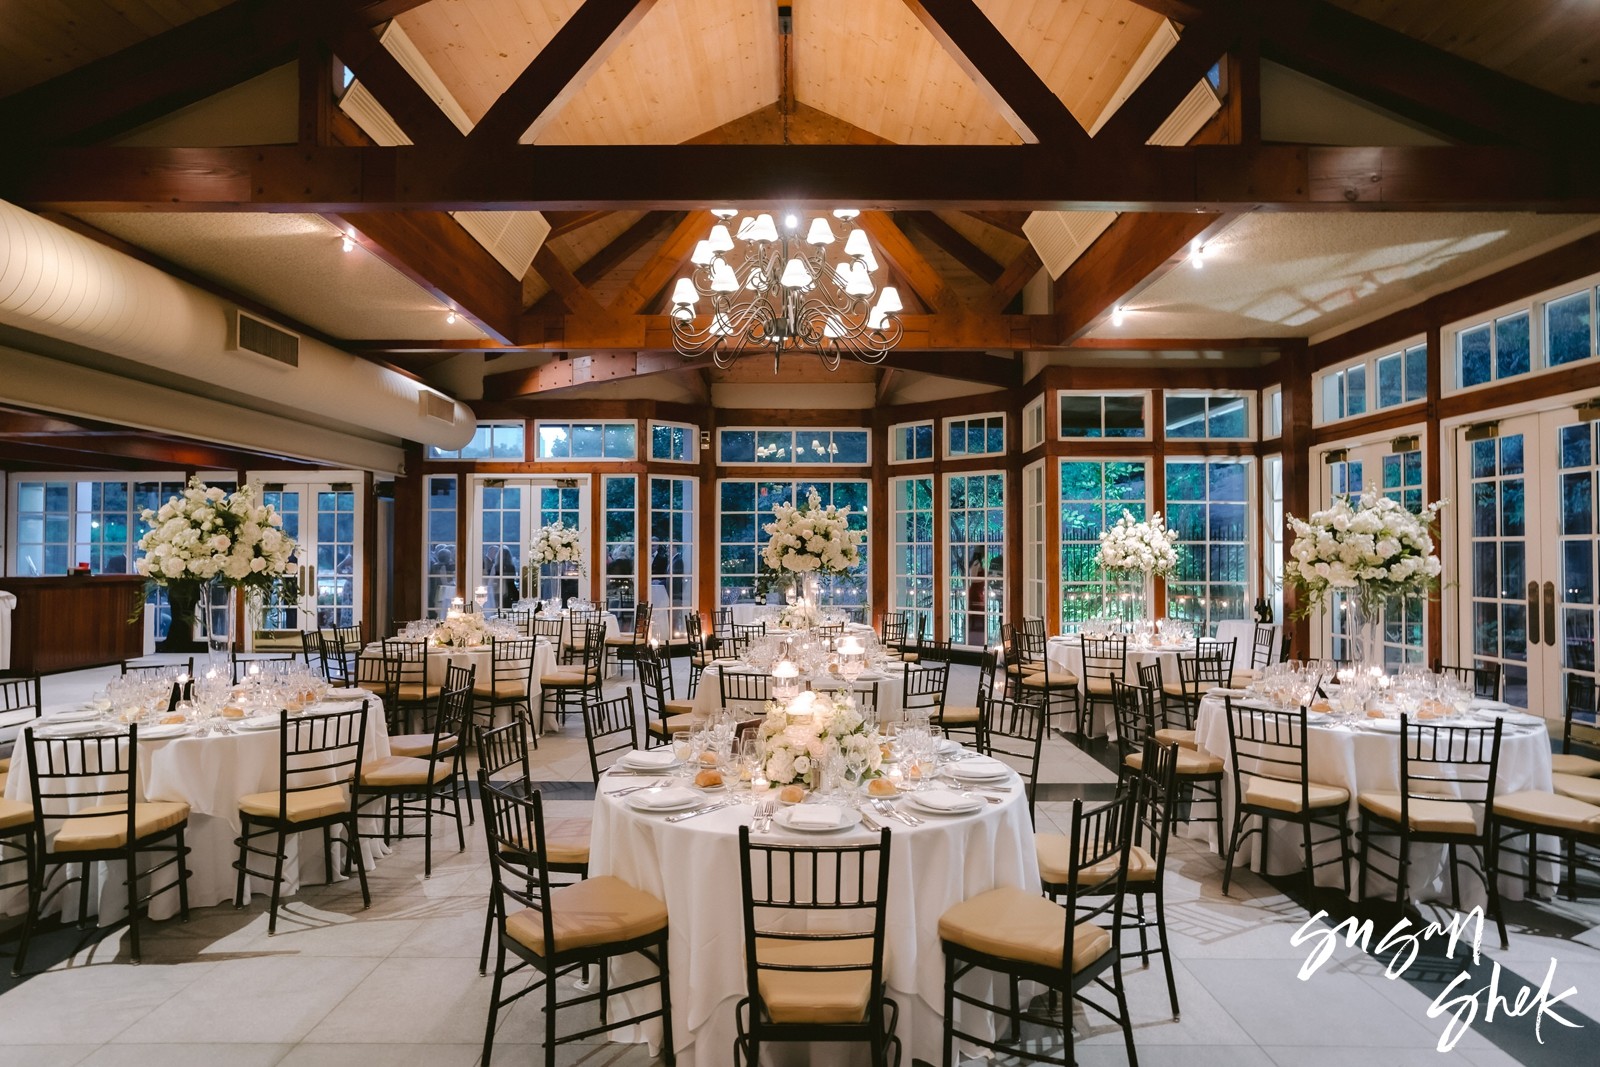 Loeb Boathouse Wedding at Central Park Boathouse in New York City